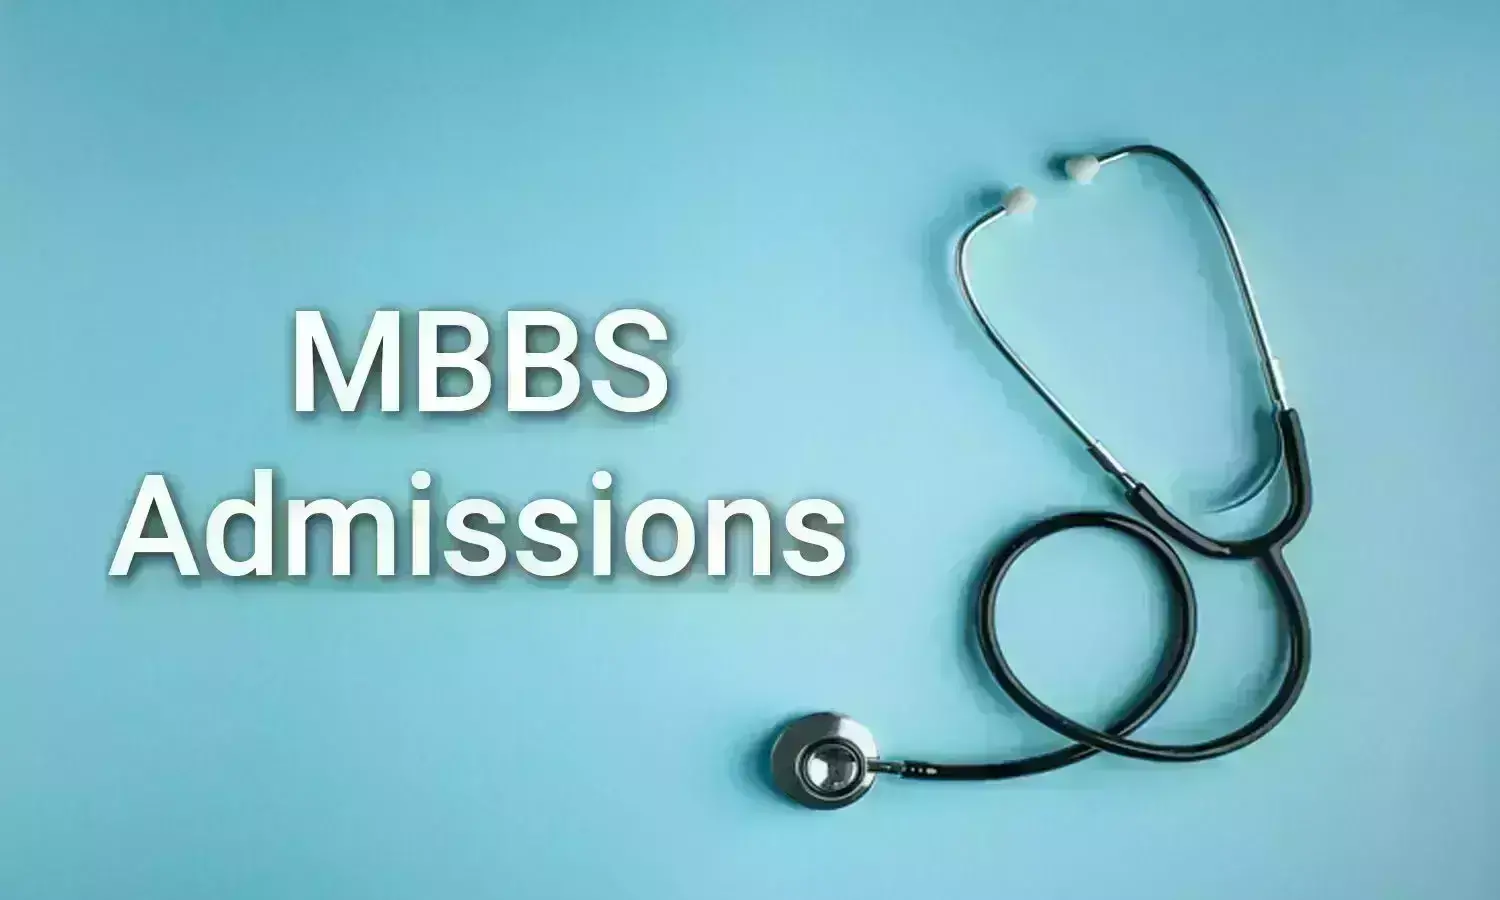 1221 MBBS seats available for Management Quota admissions, TN Health releases Tentative Seat Matrix